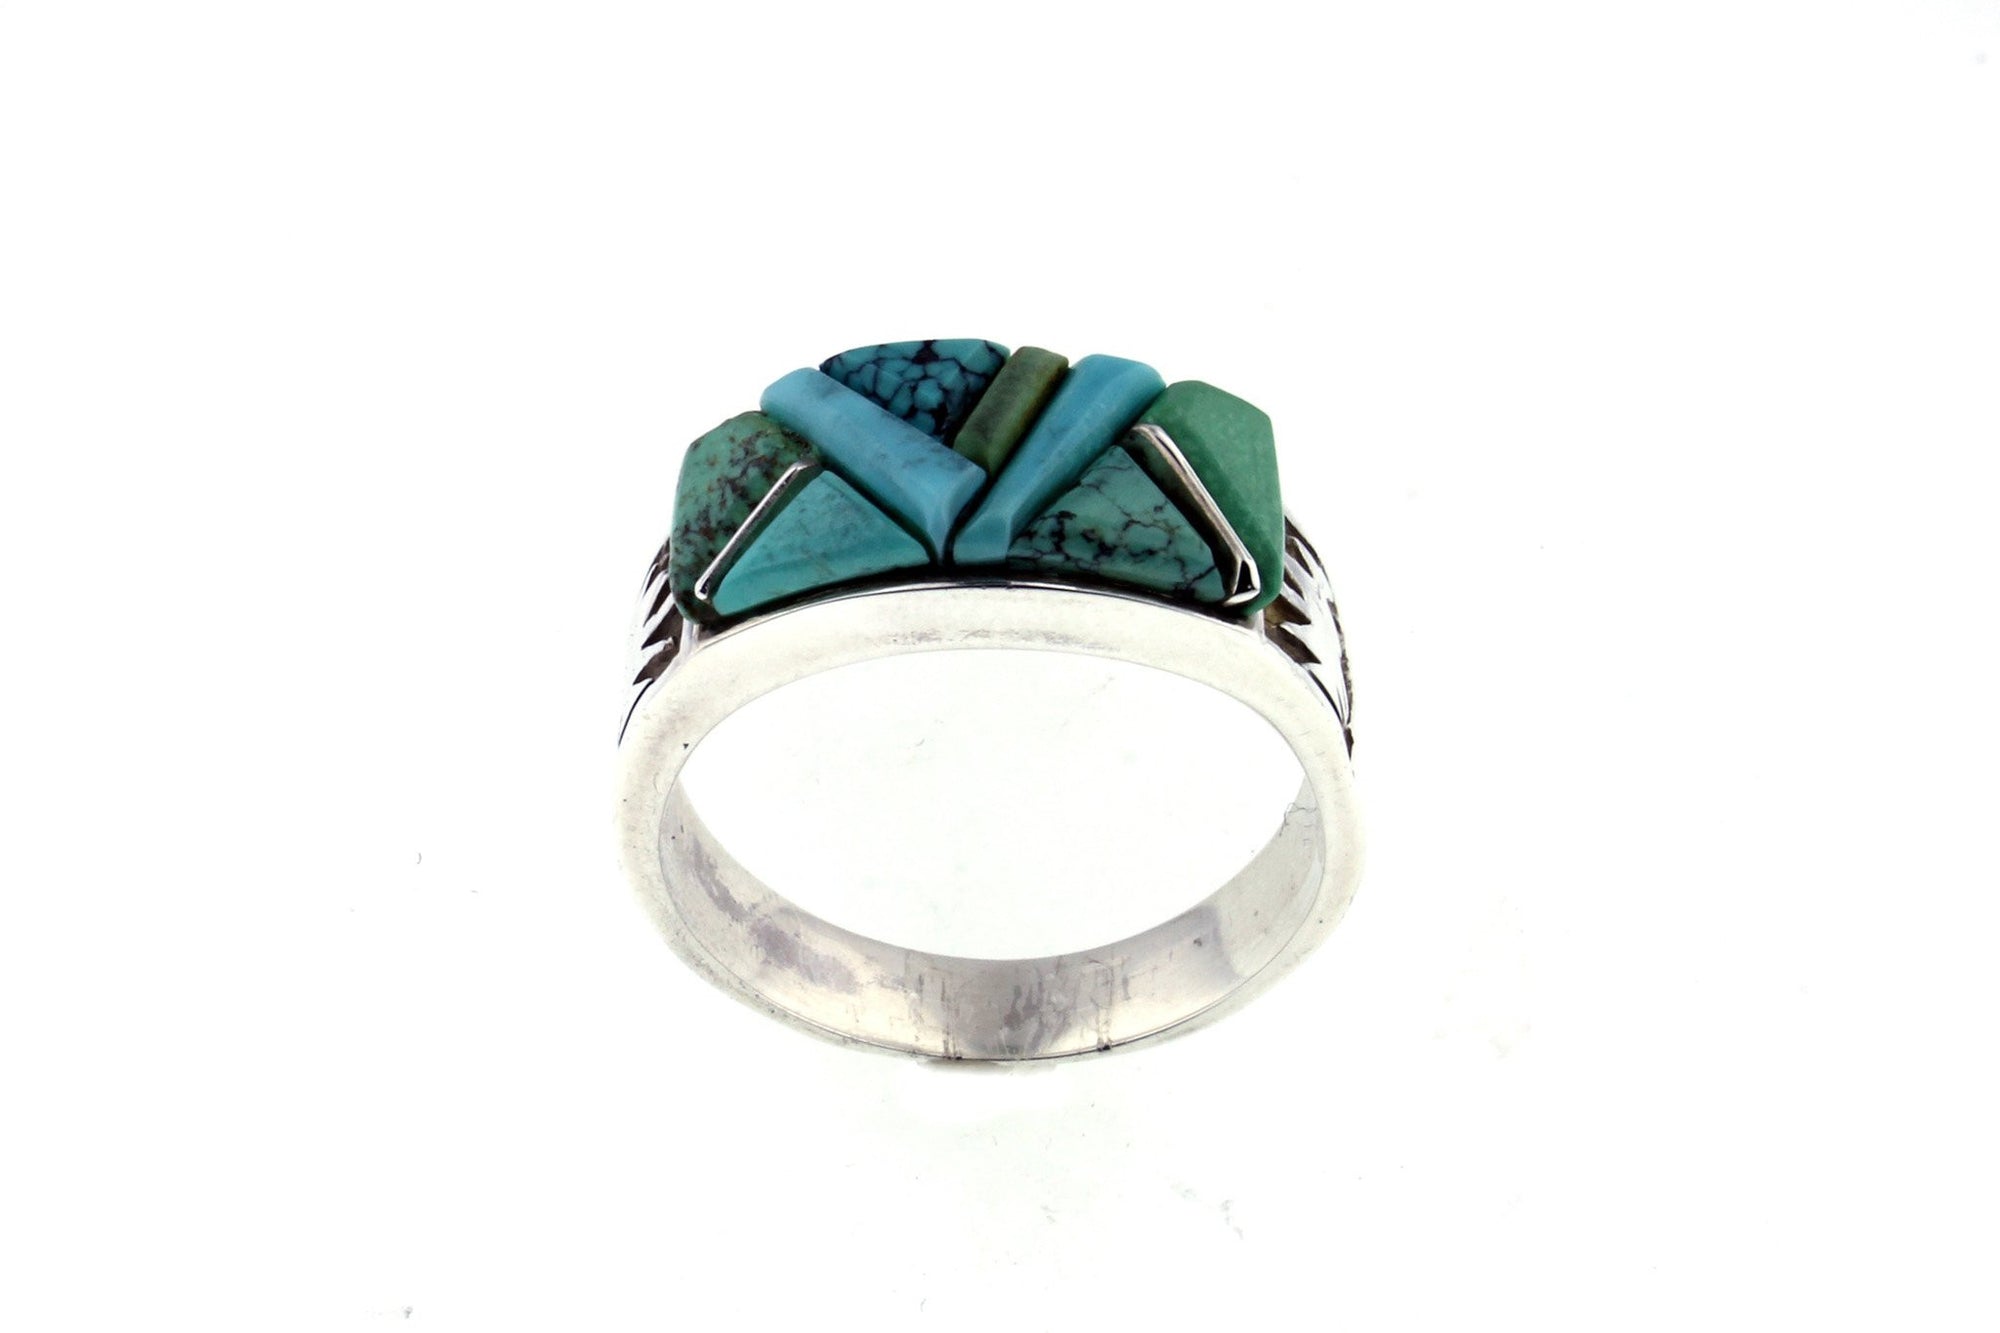 Native American Jewelry - David Rosales Pine Hill Turquoise Ring